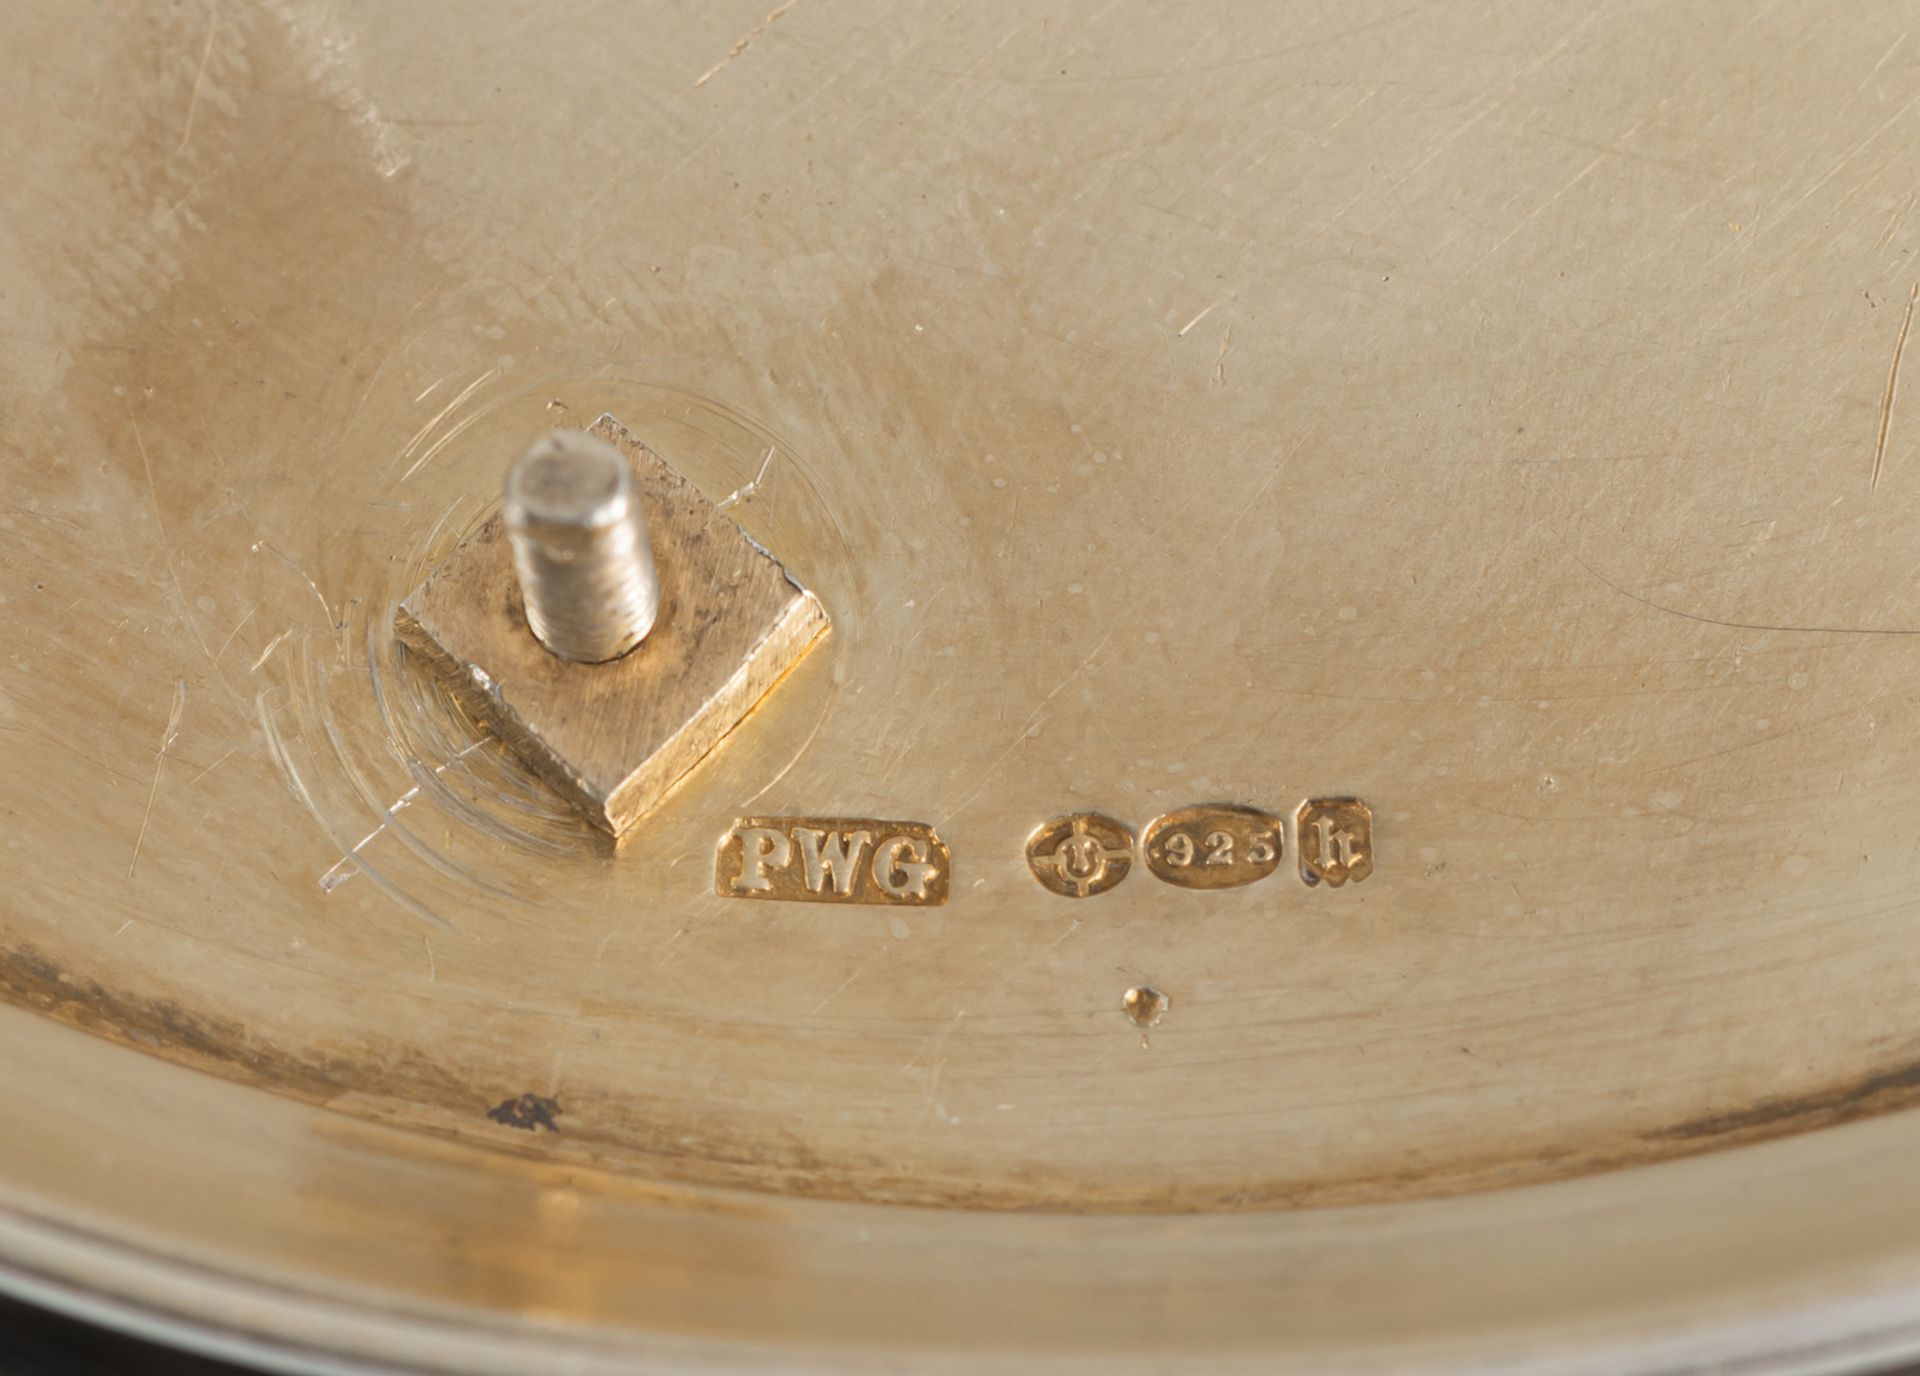 AN ART DECO PARTIAL GILT SILVER BOWL AND COVER WITH ELEPHANT - Image 4 of 5